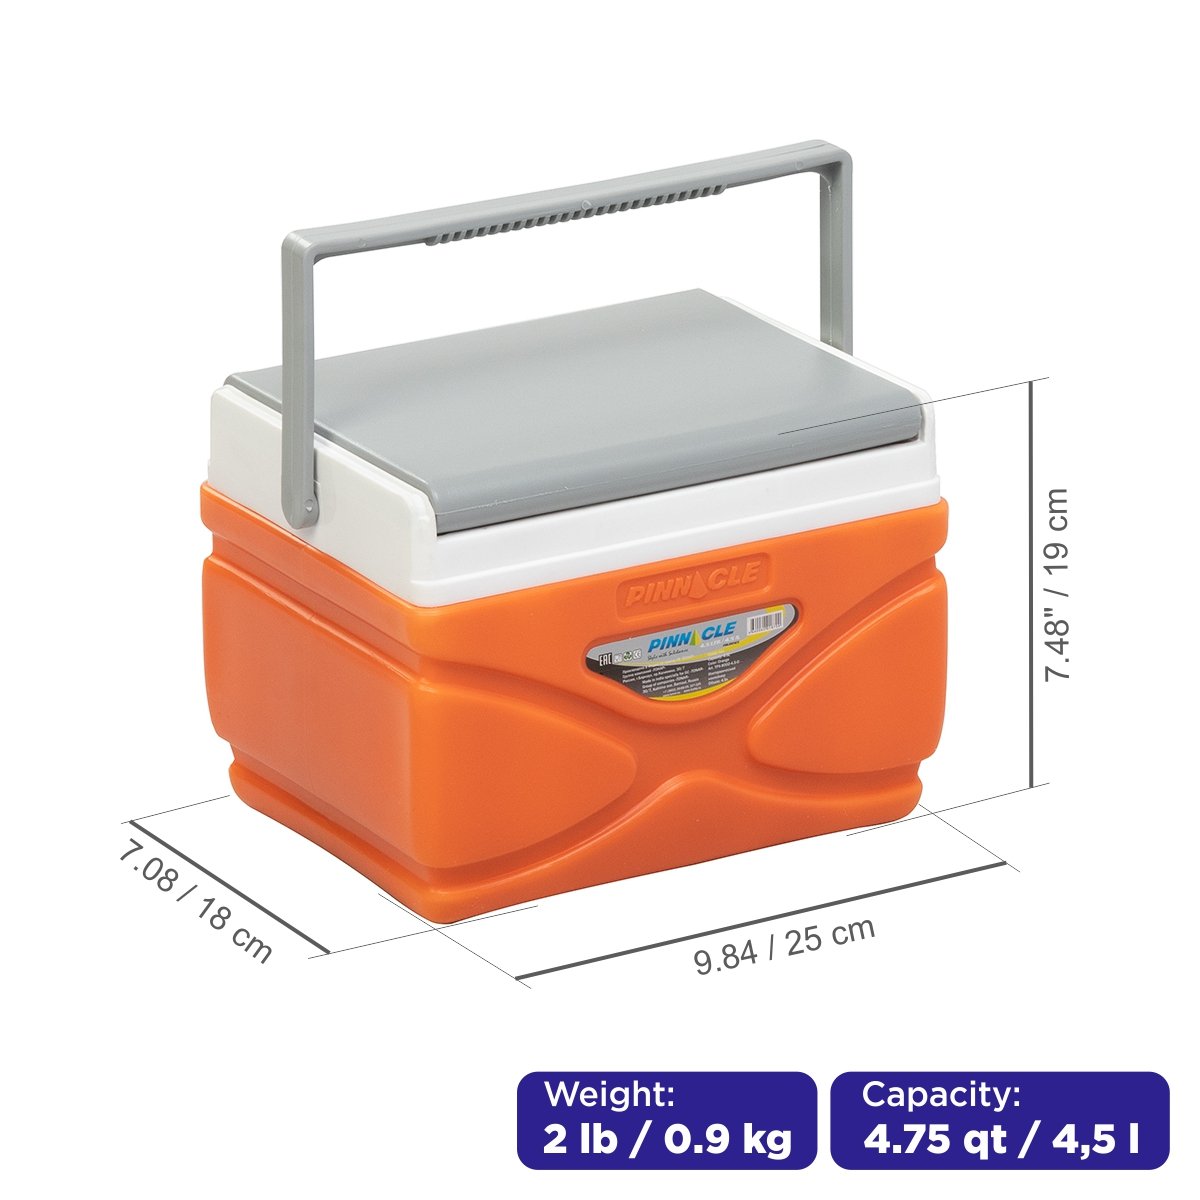 Prudence Portable Hard-Sided Ice Chest for Camping, 4 qt, with handle, orange color weighs 2 lbs and is 9.8 inches long, 7 inches wide and 7.5 inches high